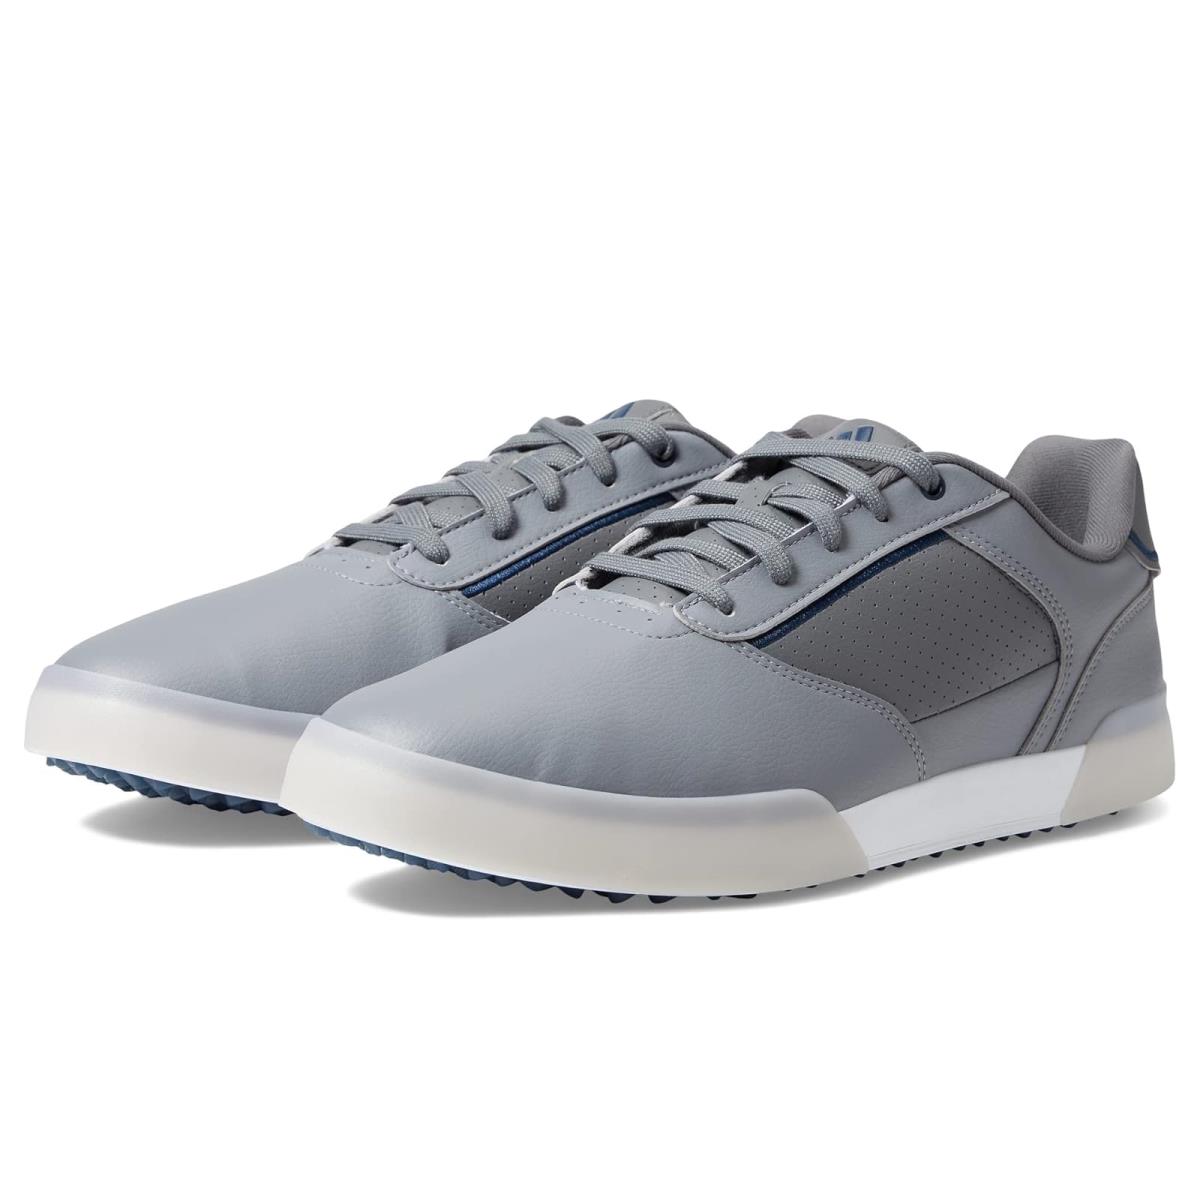 Man`s Sneakers Athletic Shoes Adidas Golf Retrocross Spikeless Golf Shoes Grey Three/Crew Navy/Grey Four